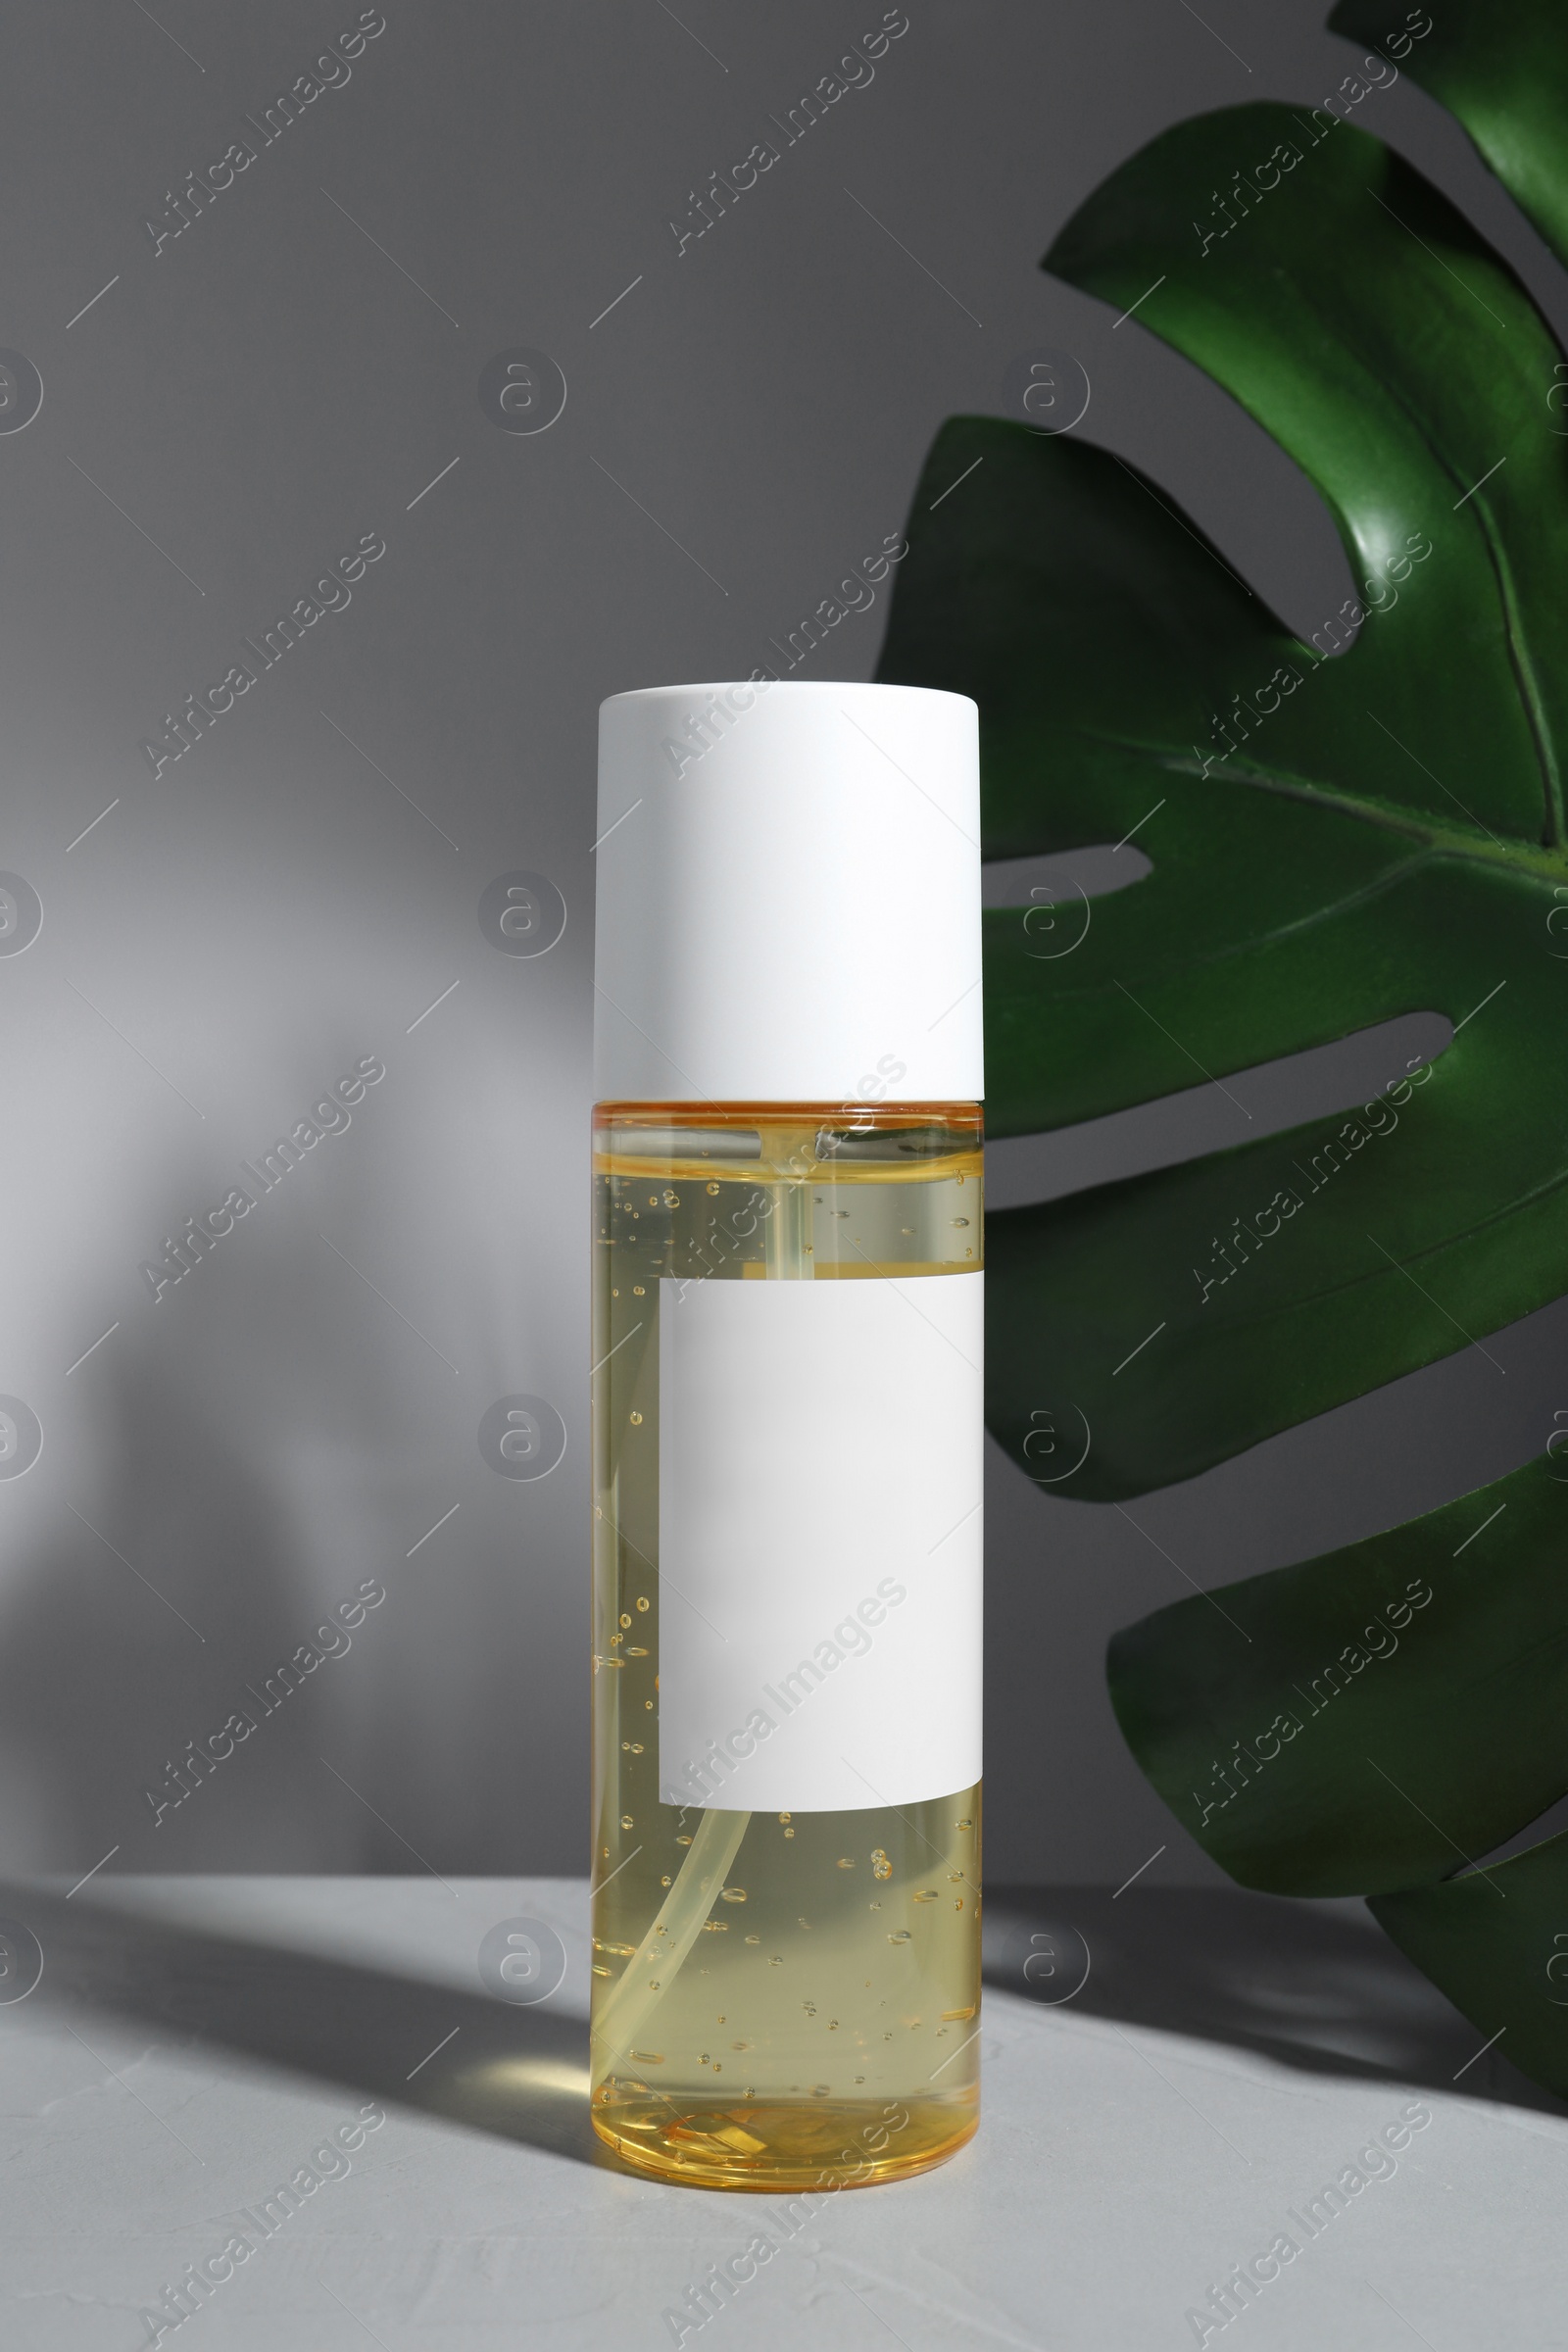 Photo of Bottle of cosmetic product and green palm leaf on table against light background